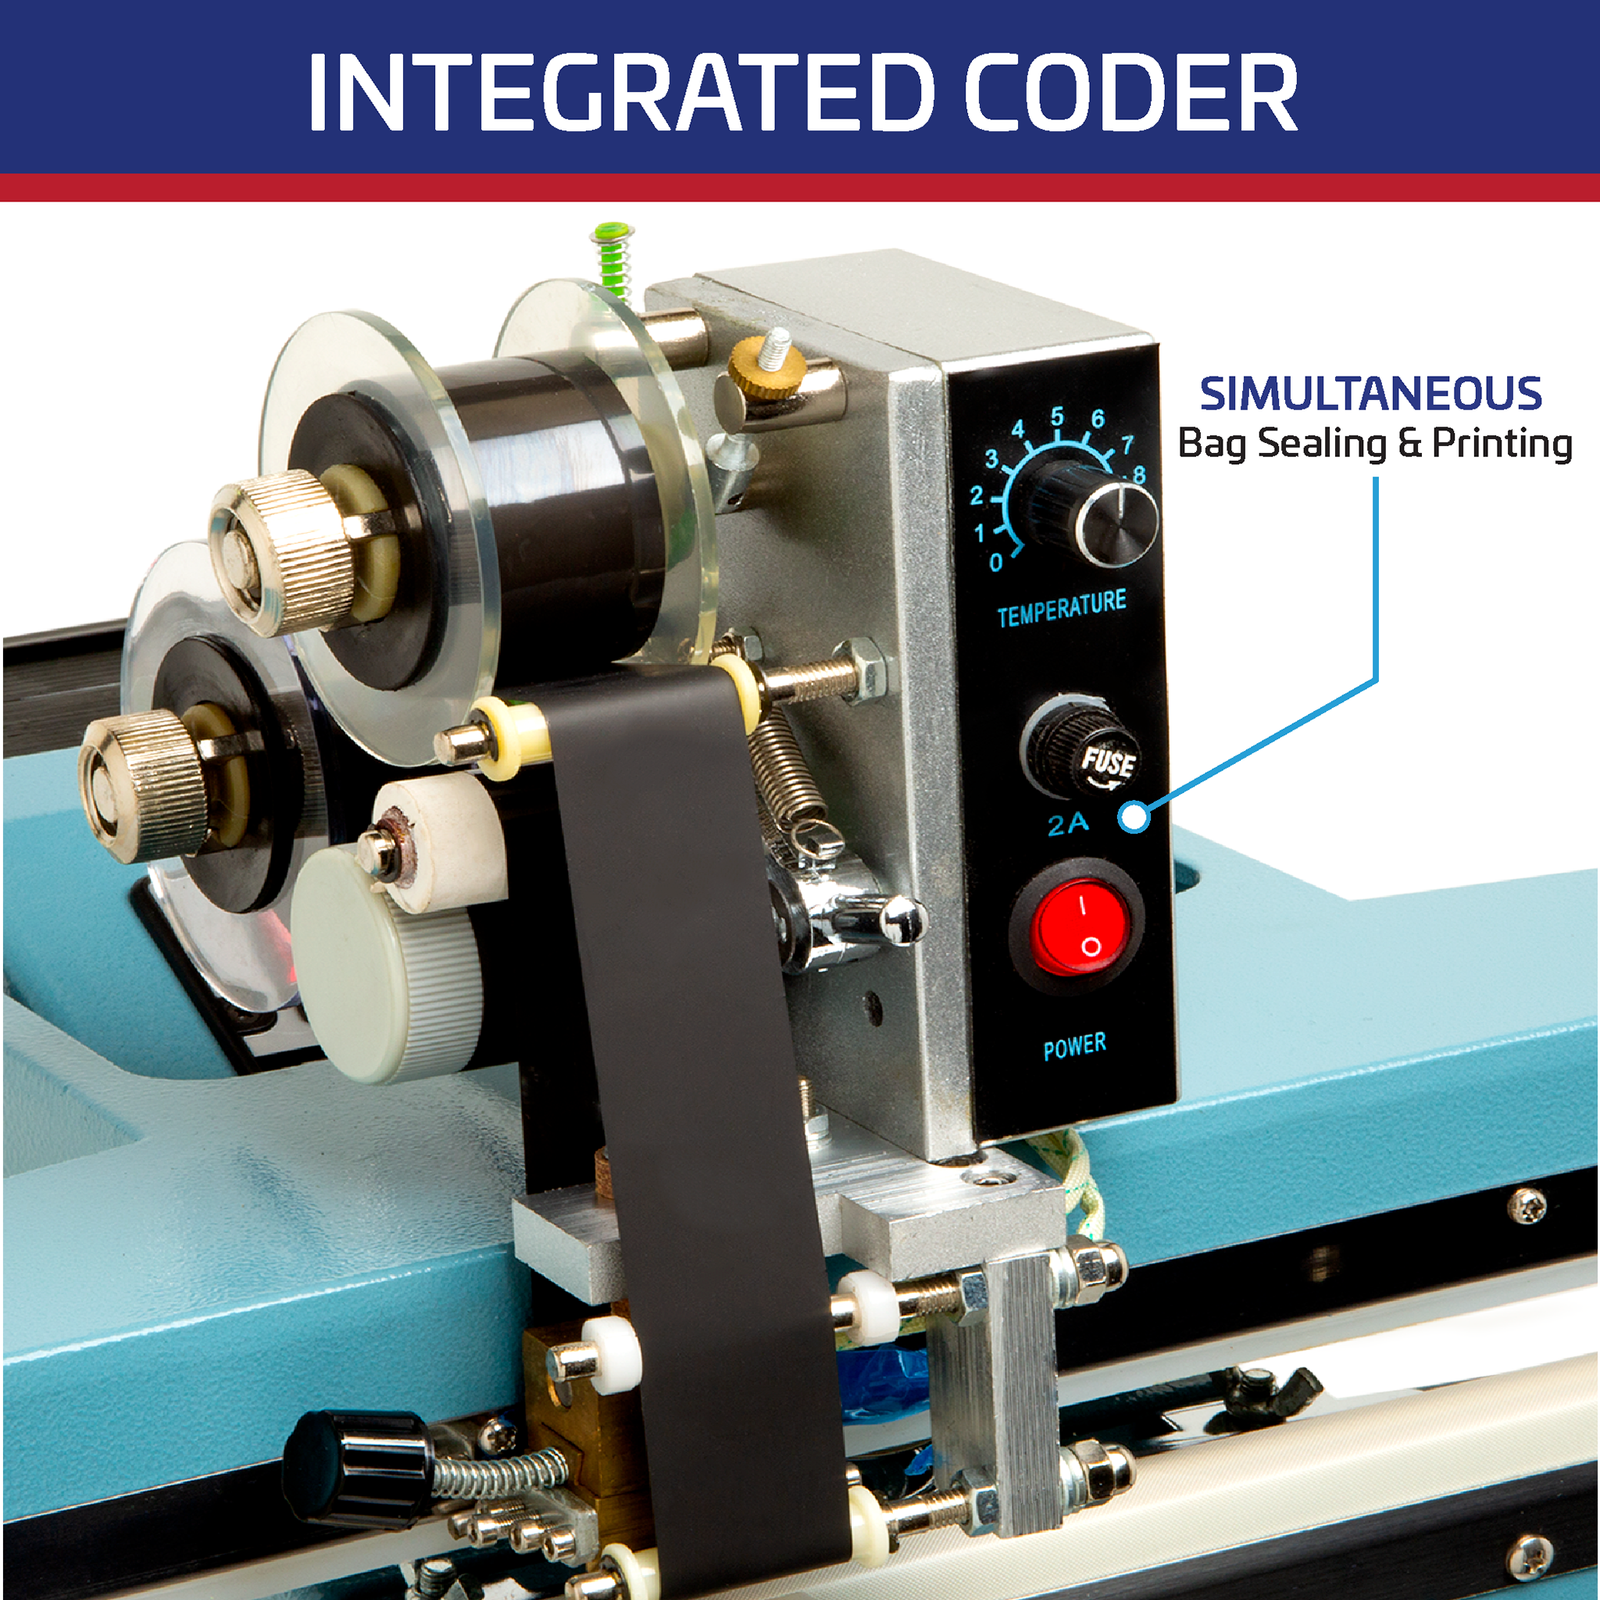 Titled reads: “Integrated Coder” shows a close up of the hot stamp printer and a text highlighting the machine’s simultaneous bag sealing and printing capabilities.